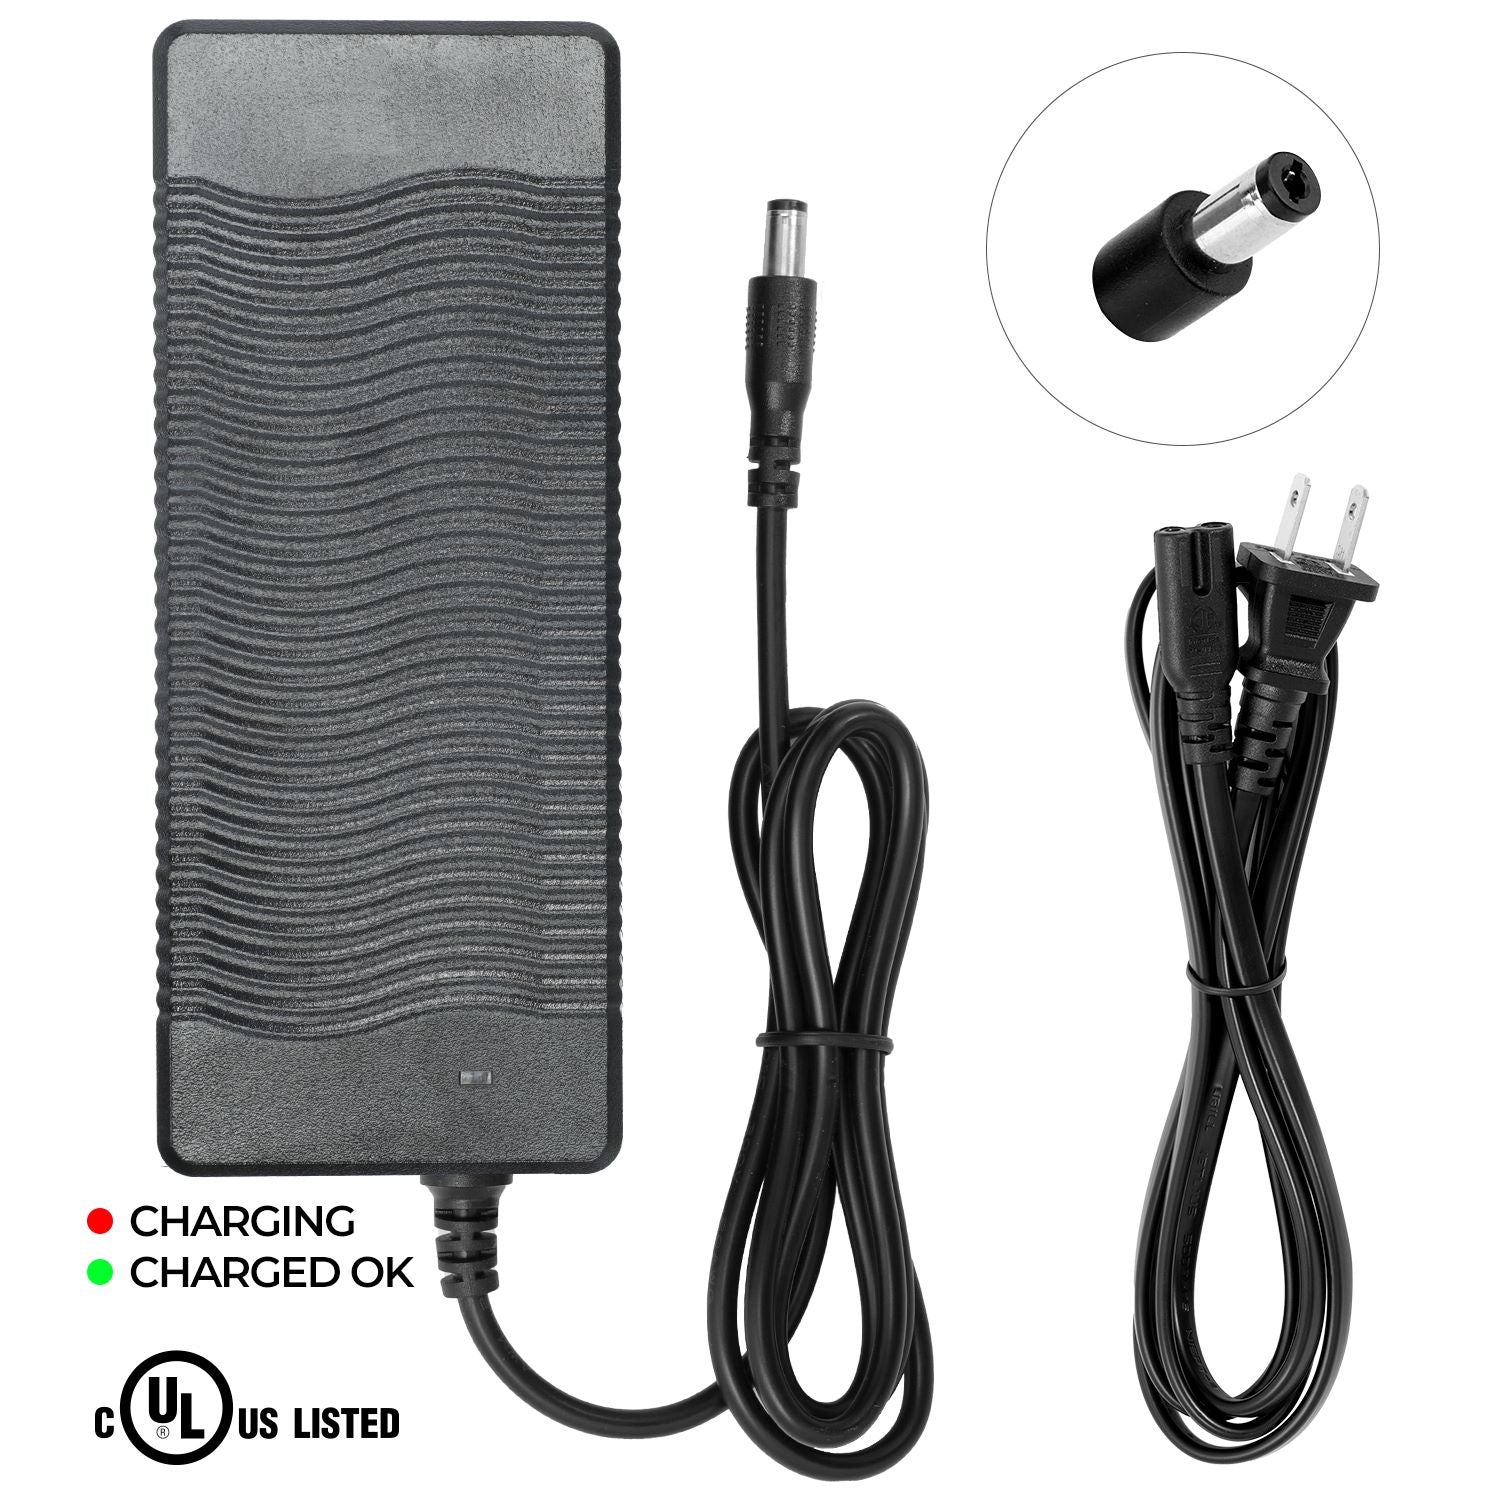 Charger for Blix Packa Genie Electric Bike